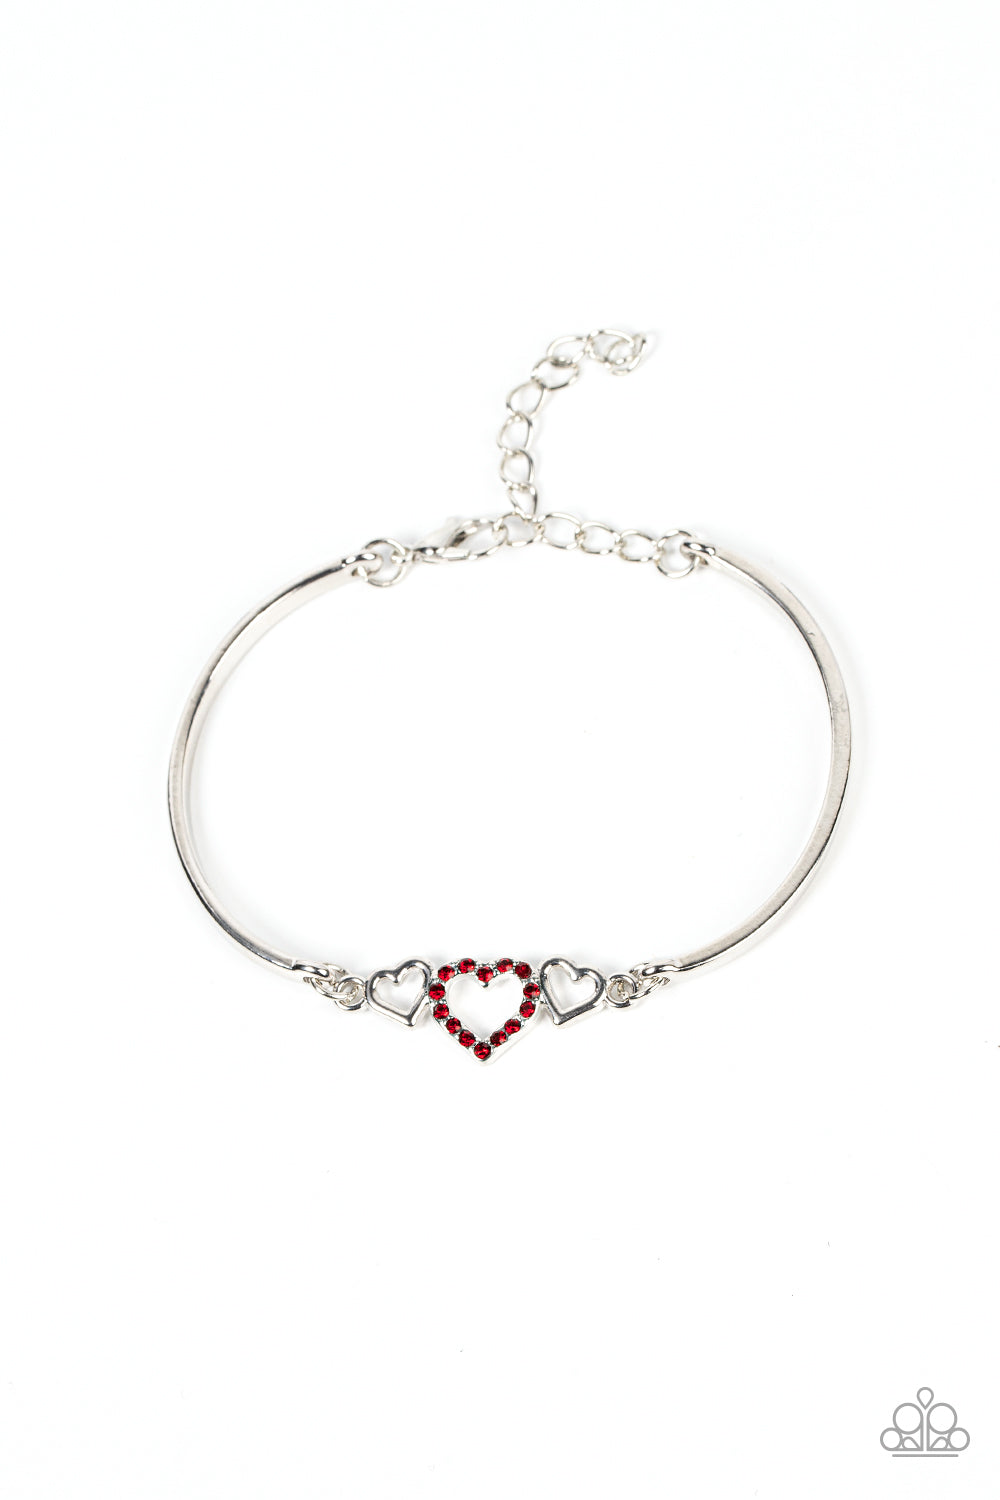 Cupids Confessions - Red Heart - Silver Bracelet - Paparazzi Jewelry - Bejeweled Accessories By Kristie - Two shiny silver hearts flank a red rhinestone dotted heart at the center of two curved silver bars, linking into a flirtatious centerpiece around the wrist. Features an adjustable clasp closure. Sold as one individual stylish bracelet.